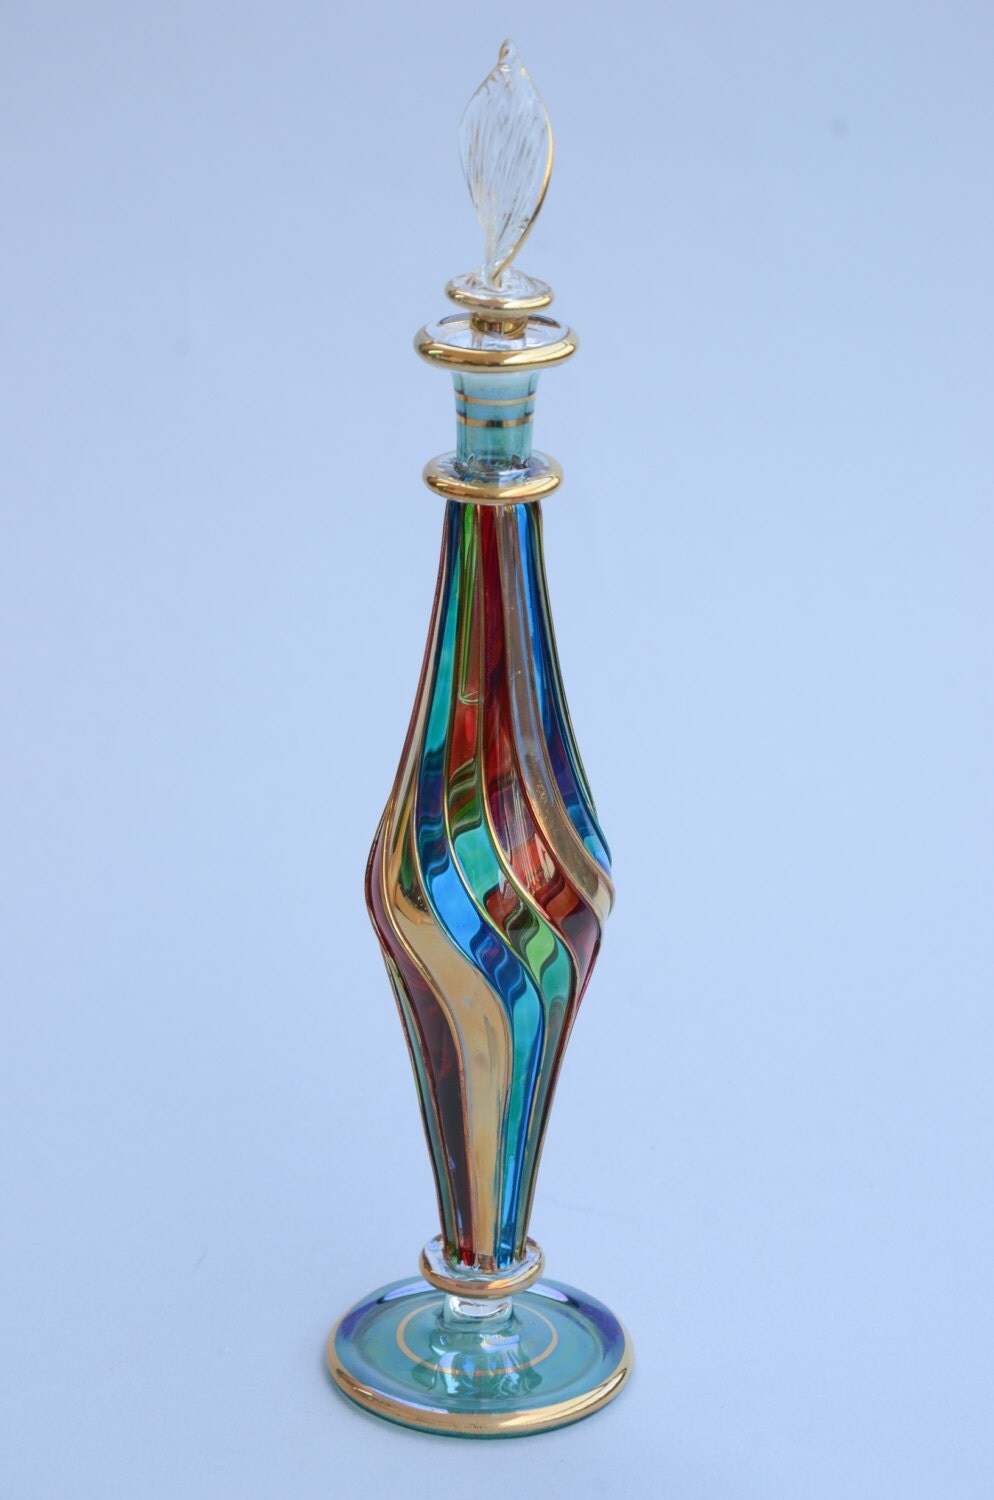 Hand Made Egyptian Perfume Bottles By Suna55 On Etsy